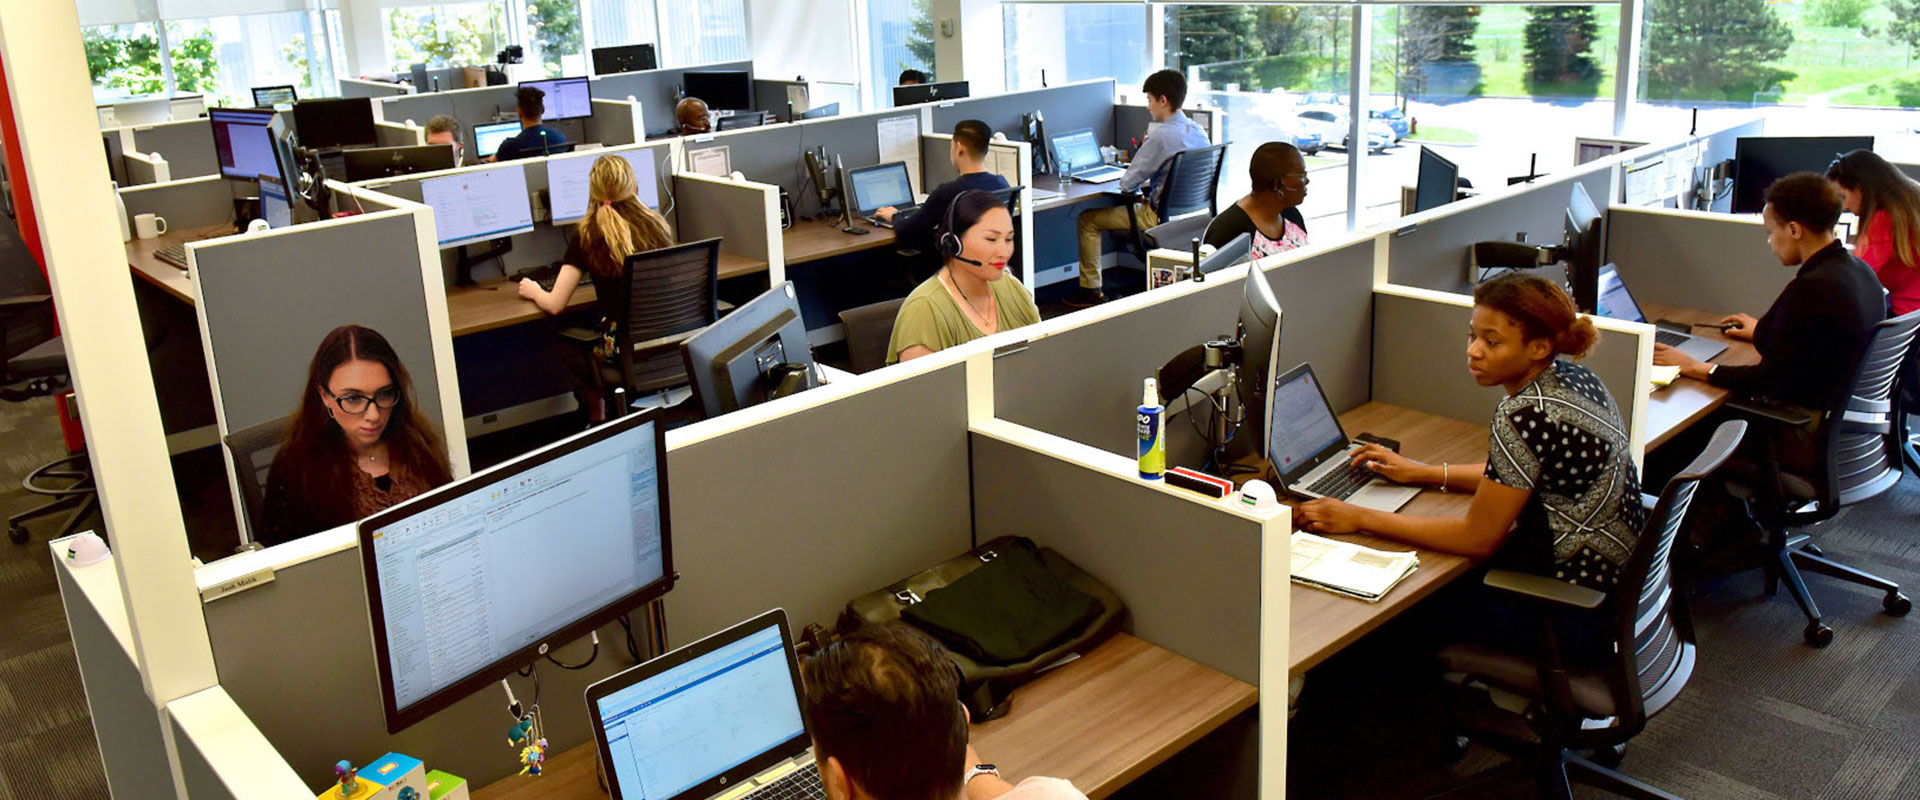 A snapshot of employees working at the B&M's 24 hours central contact centre